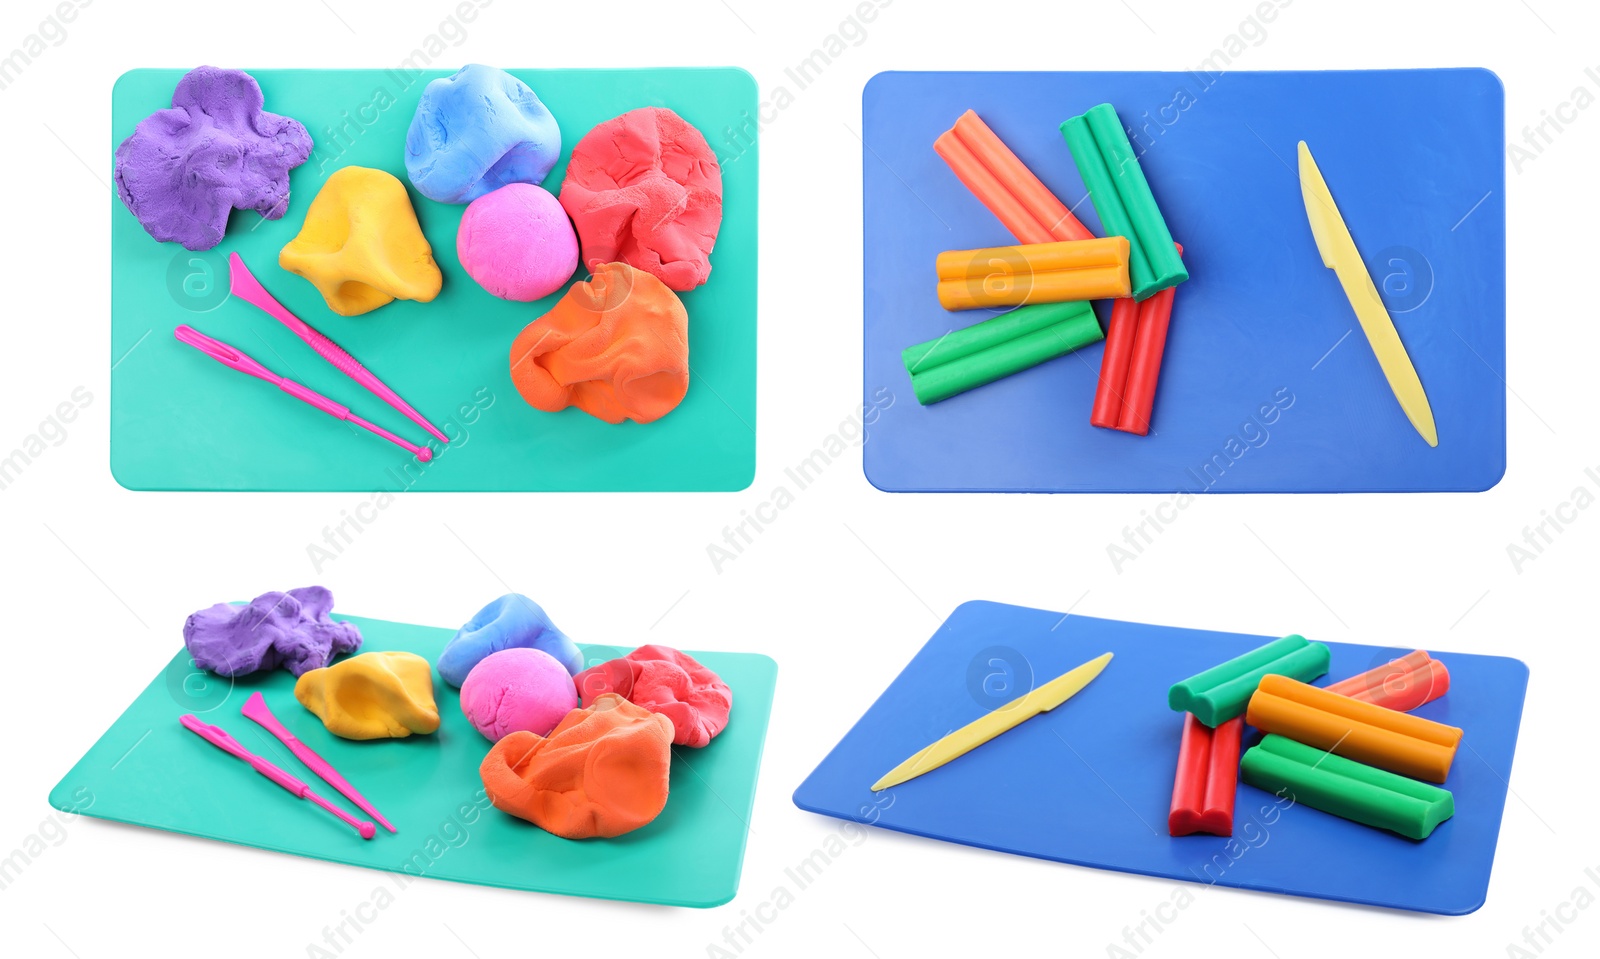 Image of Board with plasticine and tools on white background, collage